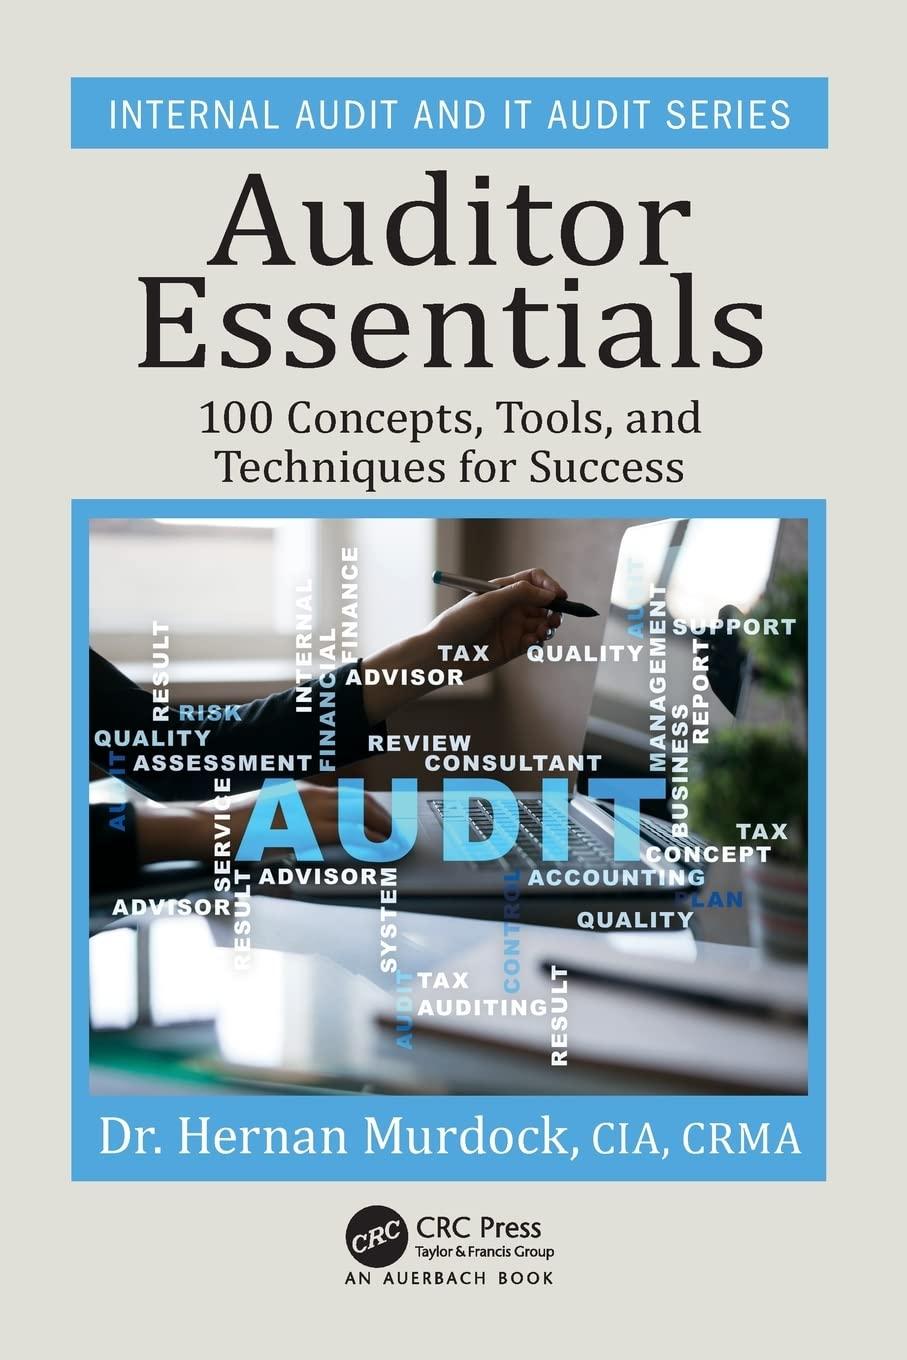 auditor essentials 100 concepts tips tools and techniques for success 1st edition hernan murdock 1138036919,